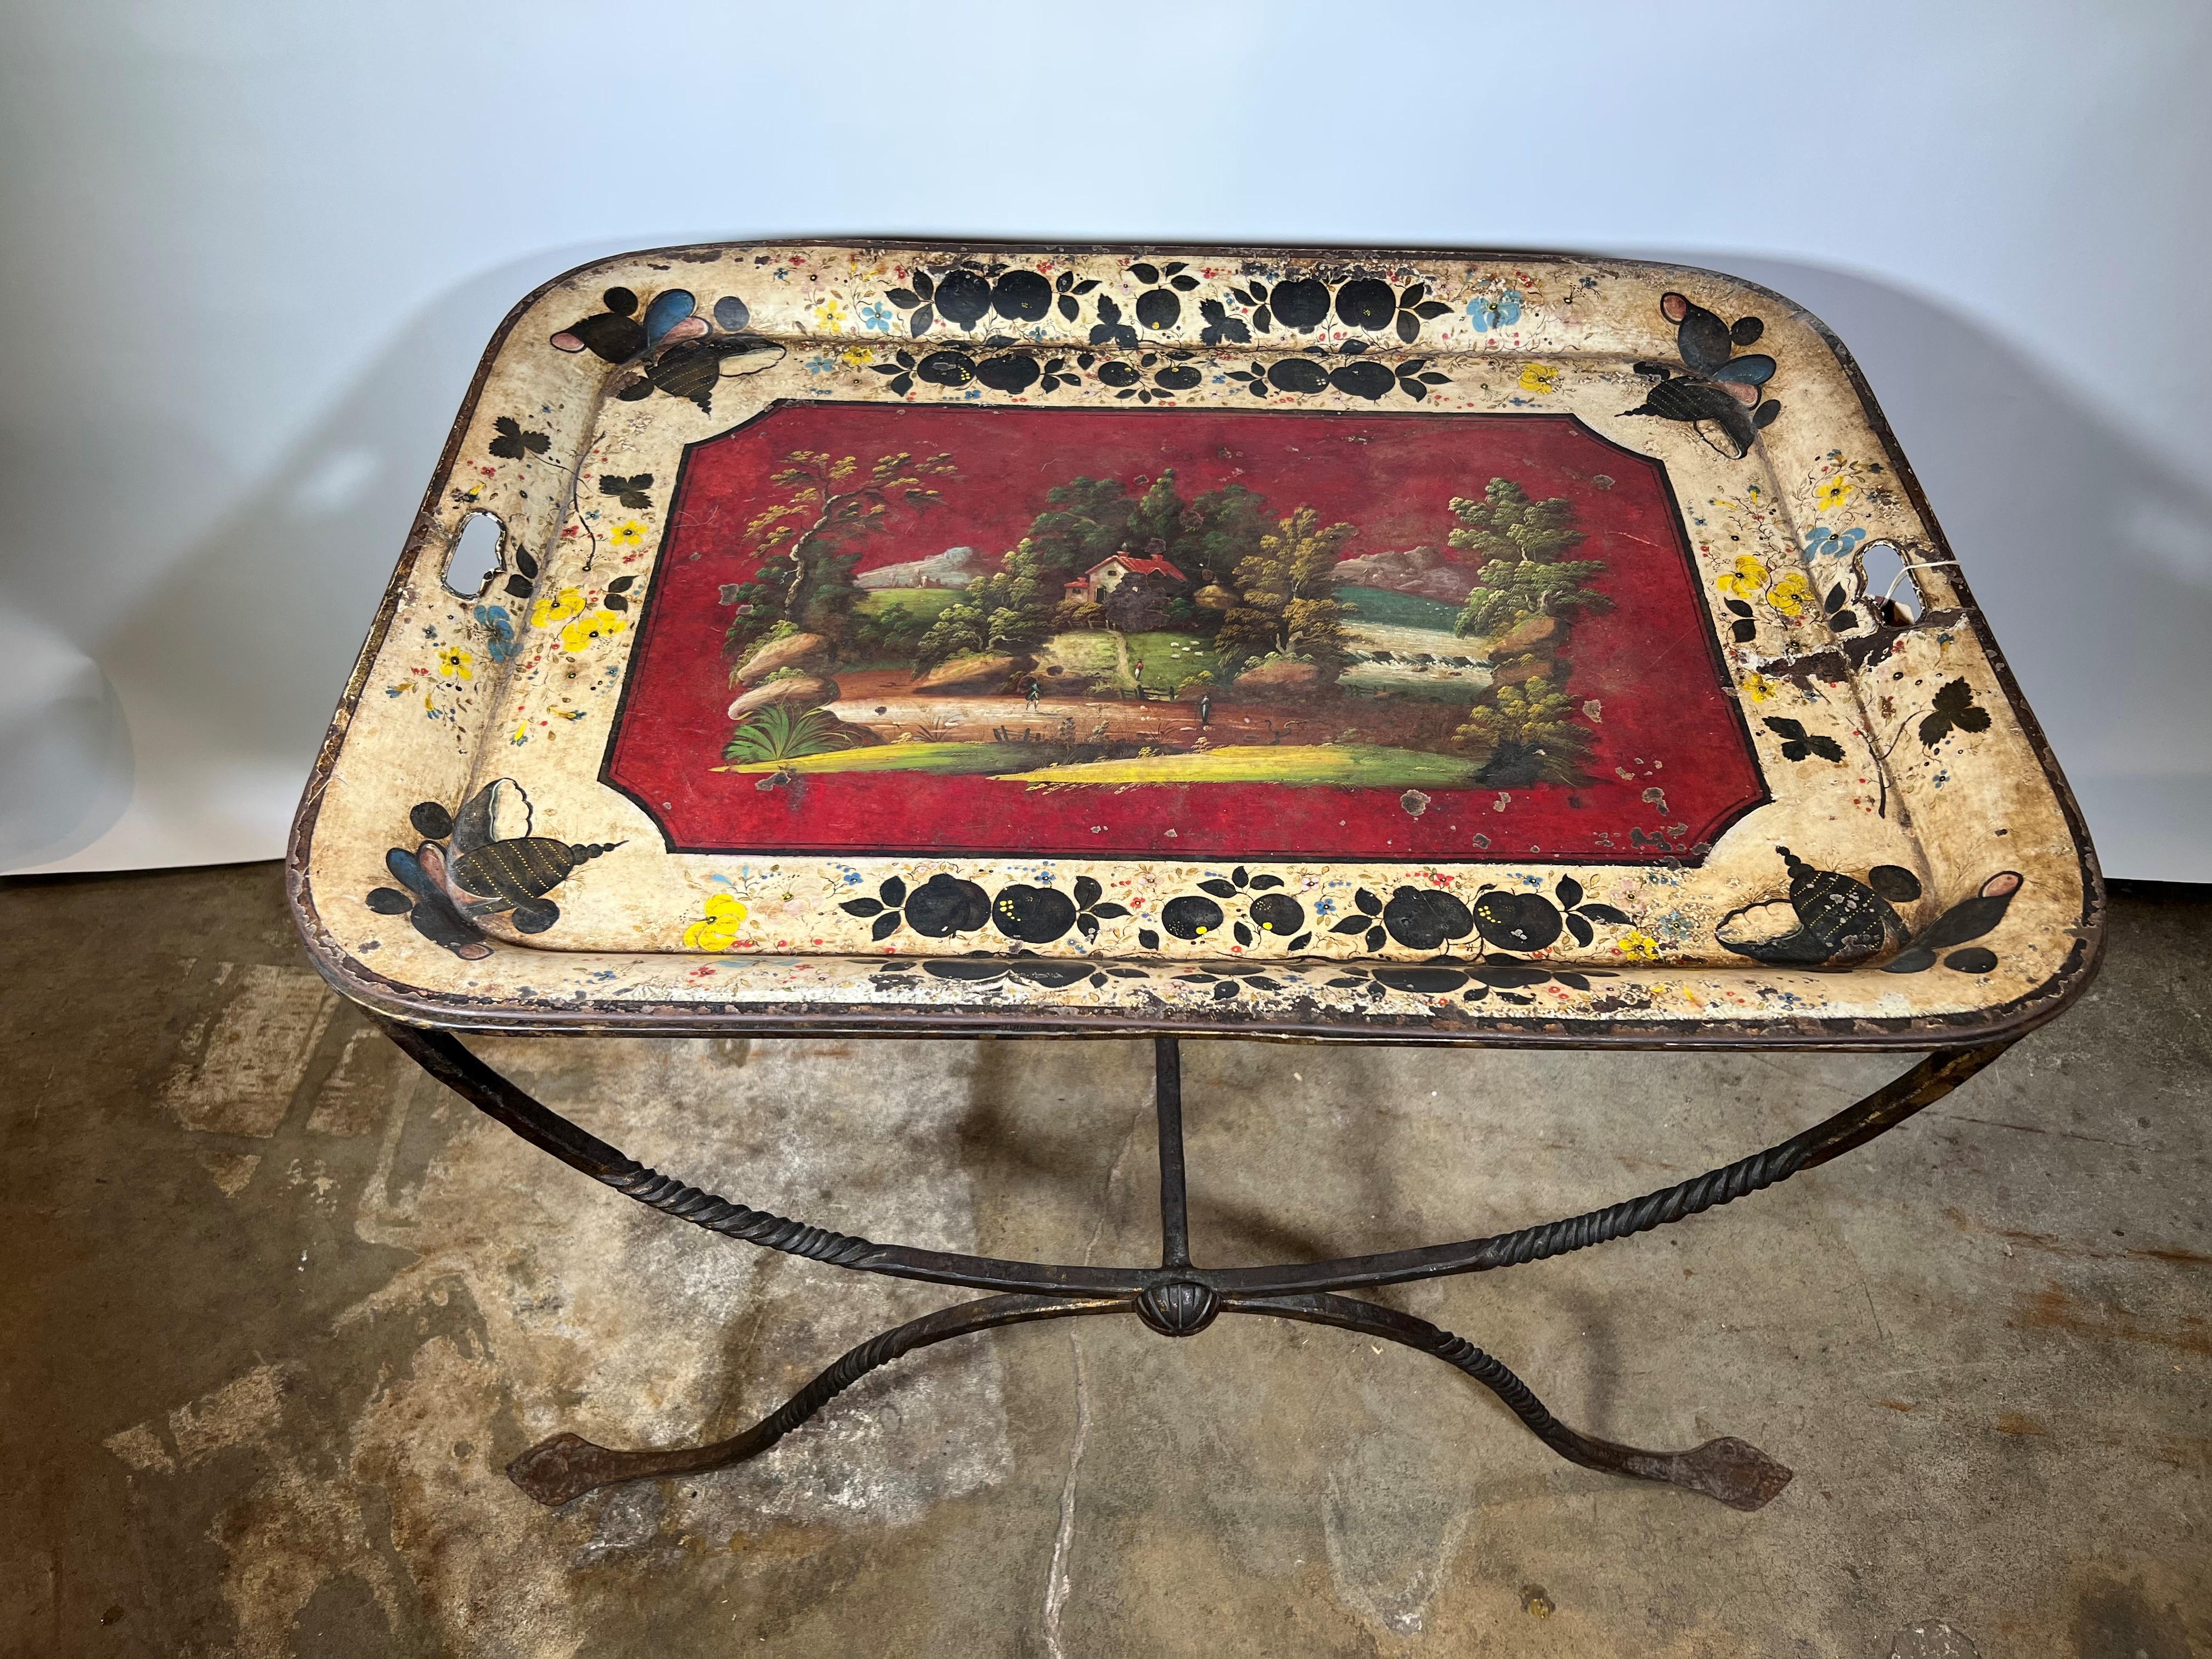 A delightful French side table composed of a very handsome wrought iron base with the removable polychromed tole tray top. I terrific accent piece giving a pop of color.